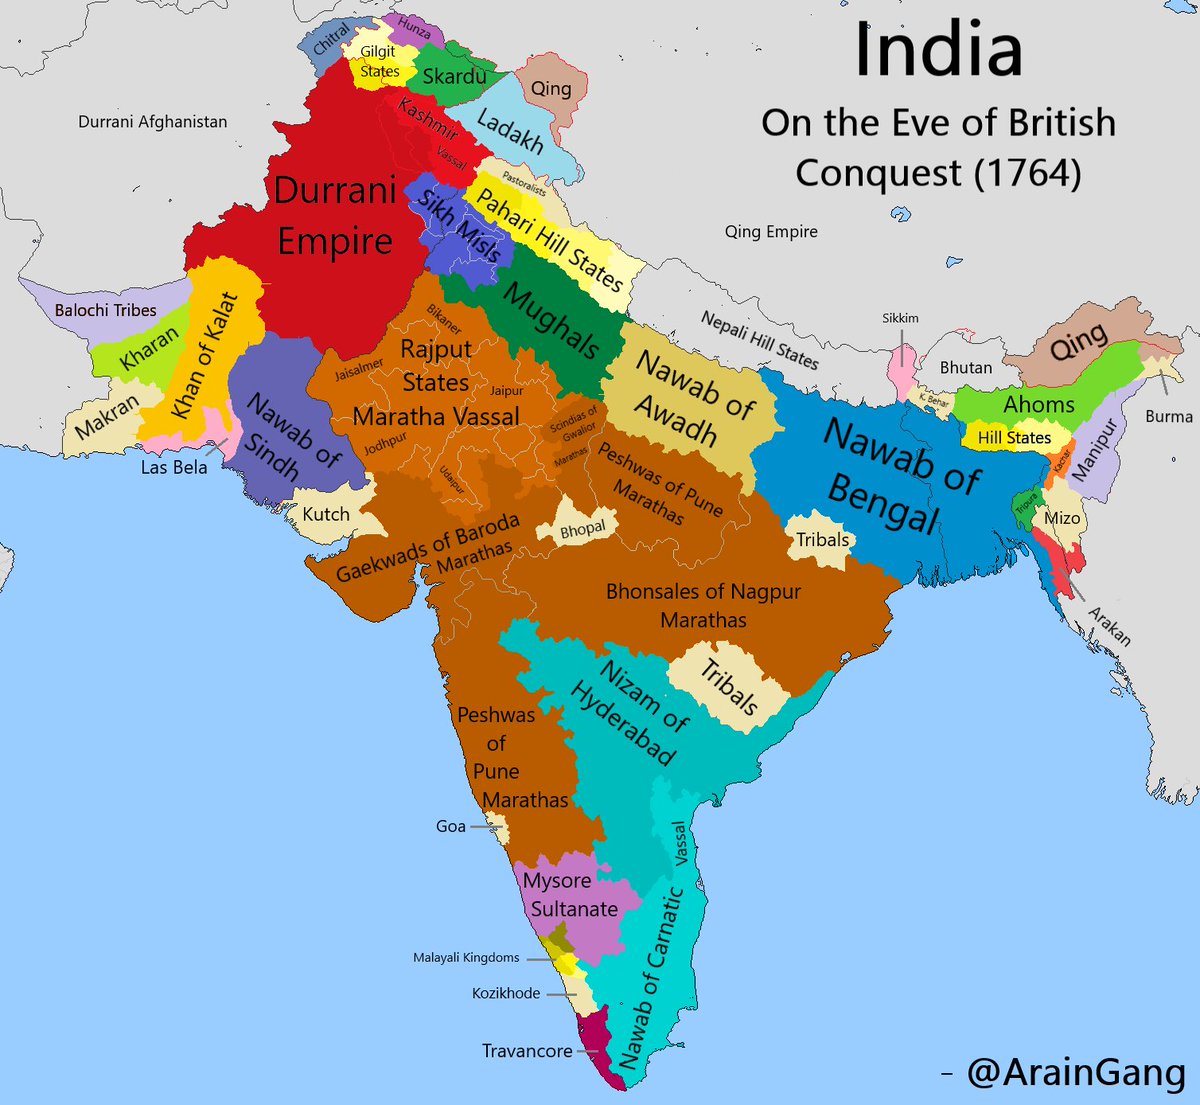 Most of the Indian Subcontinent was not under the control of the Marathas, when the British began their formal conquests.